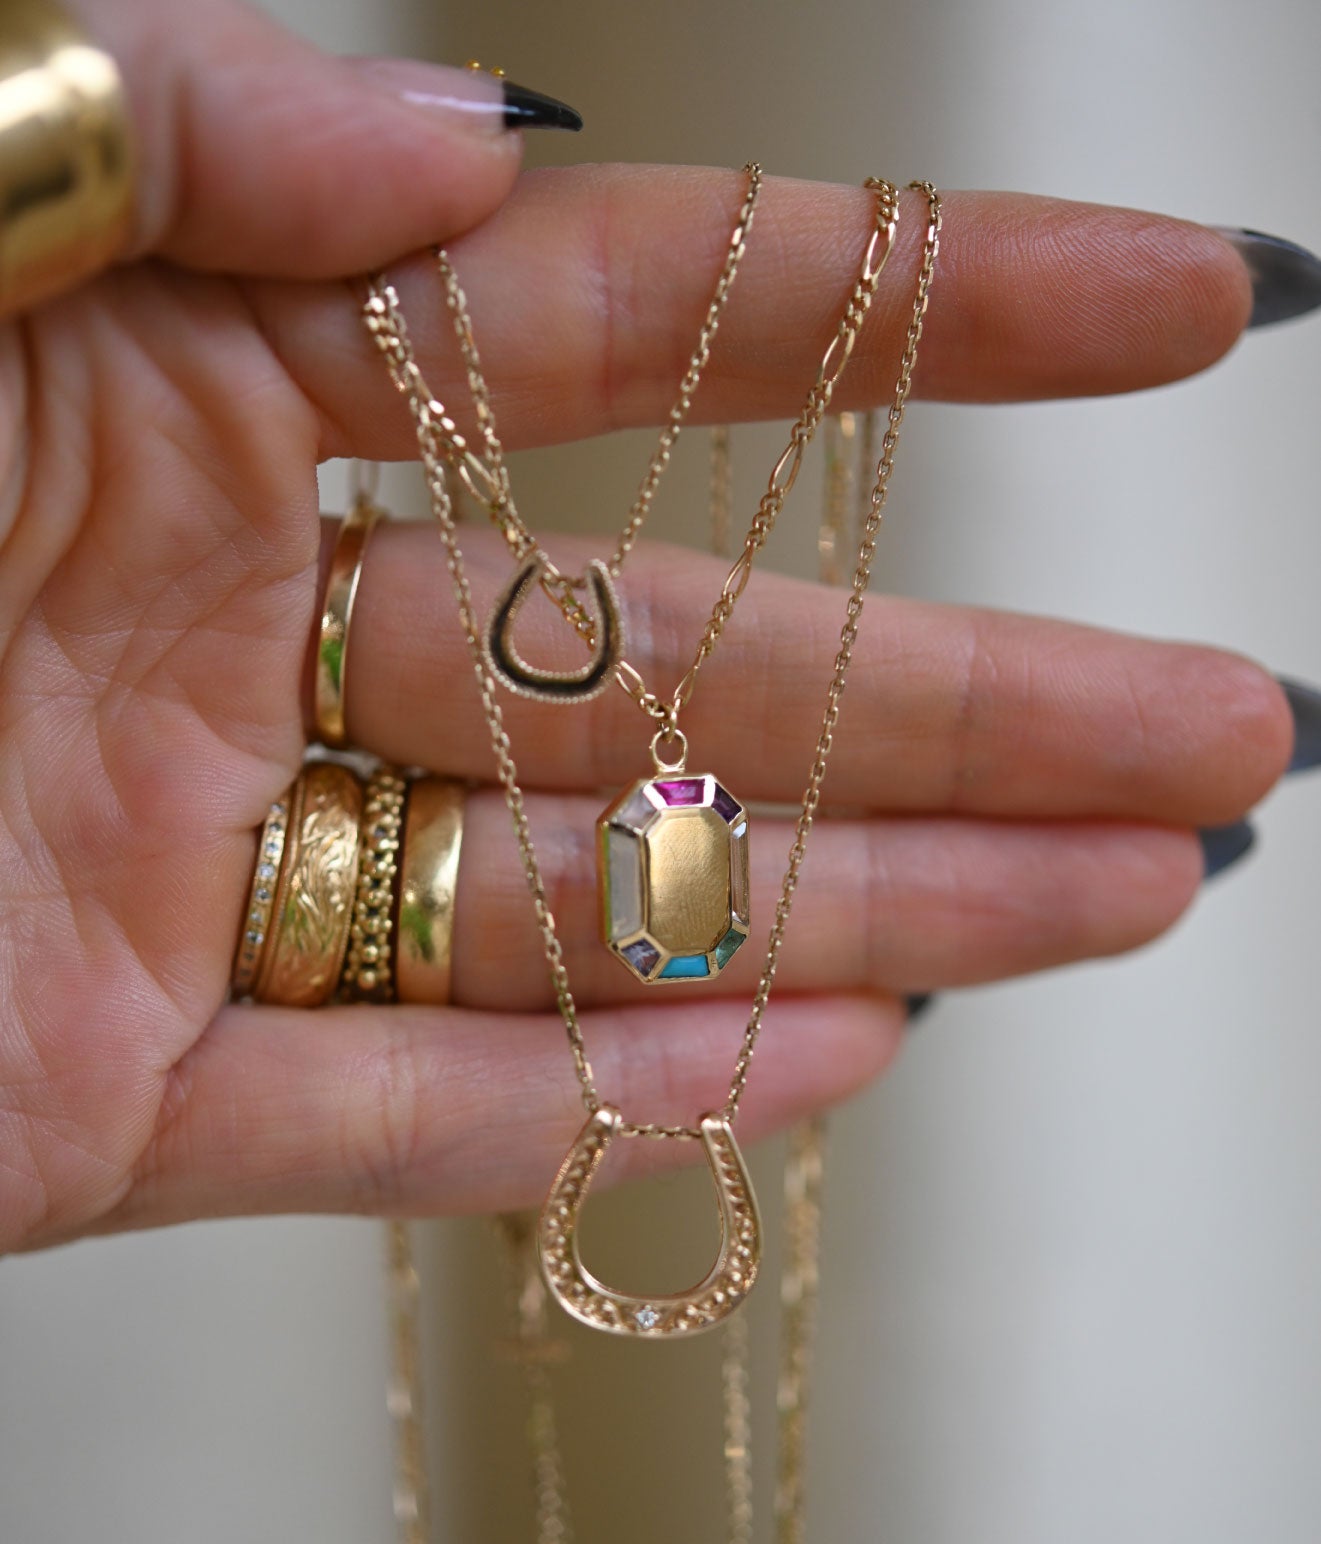 Models hand showing Métier gold necklace and rings